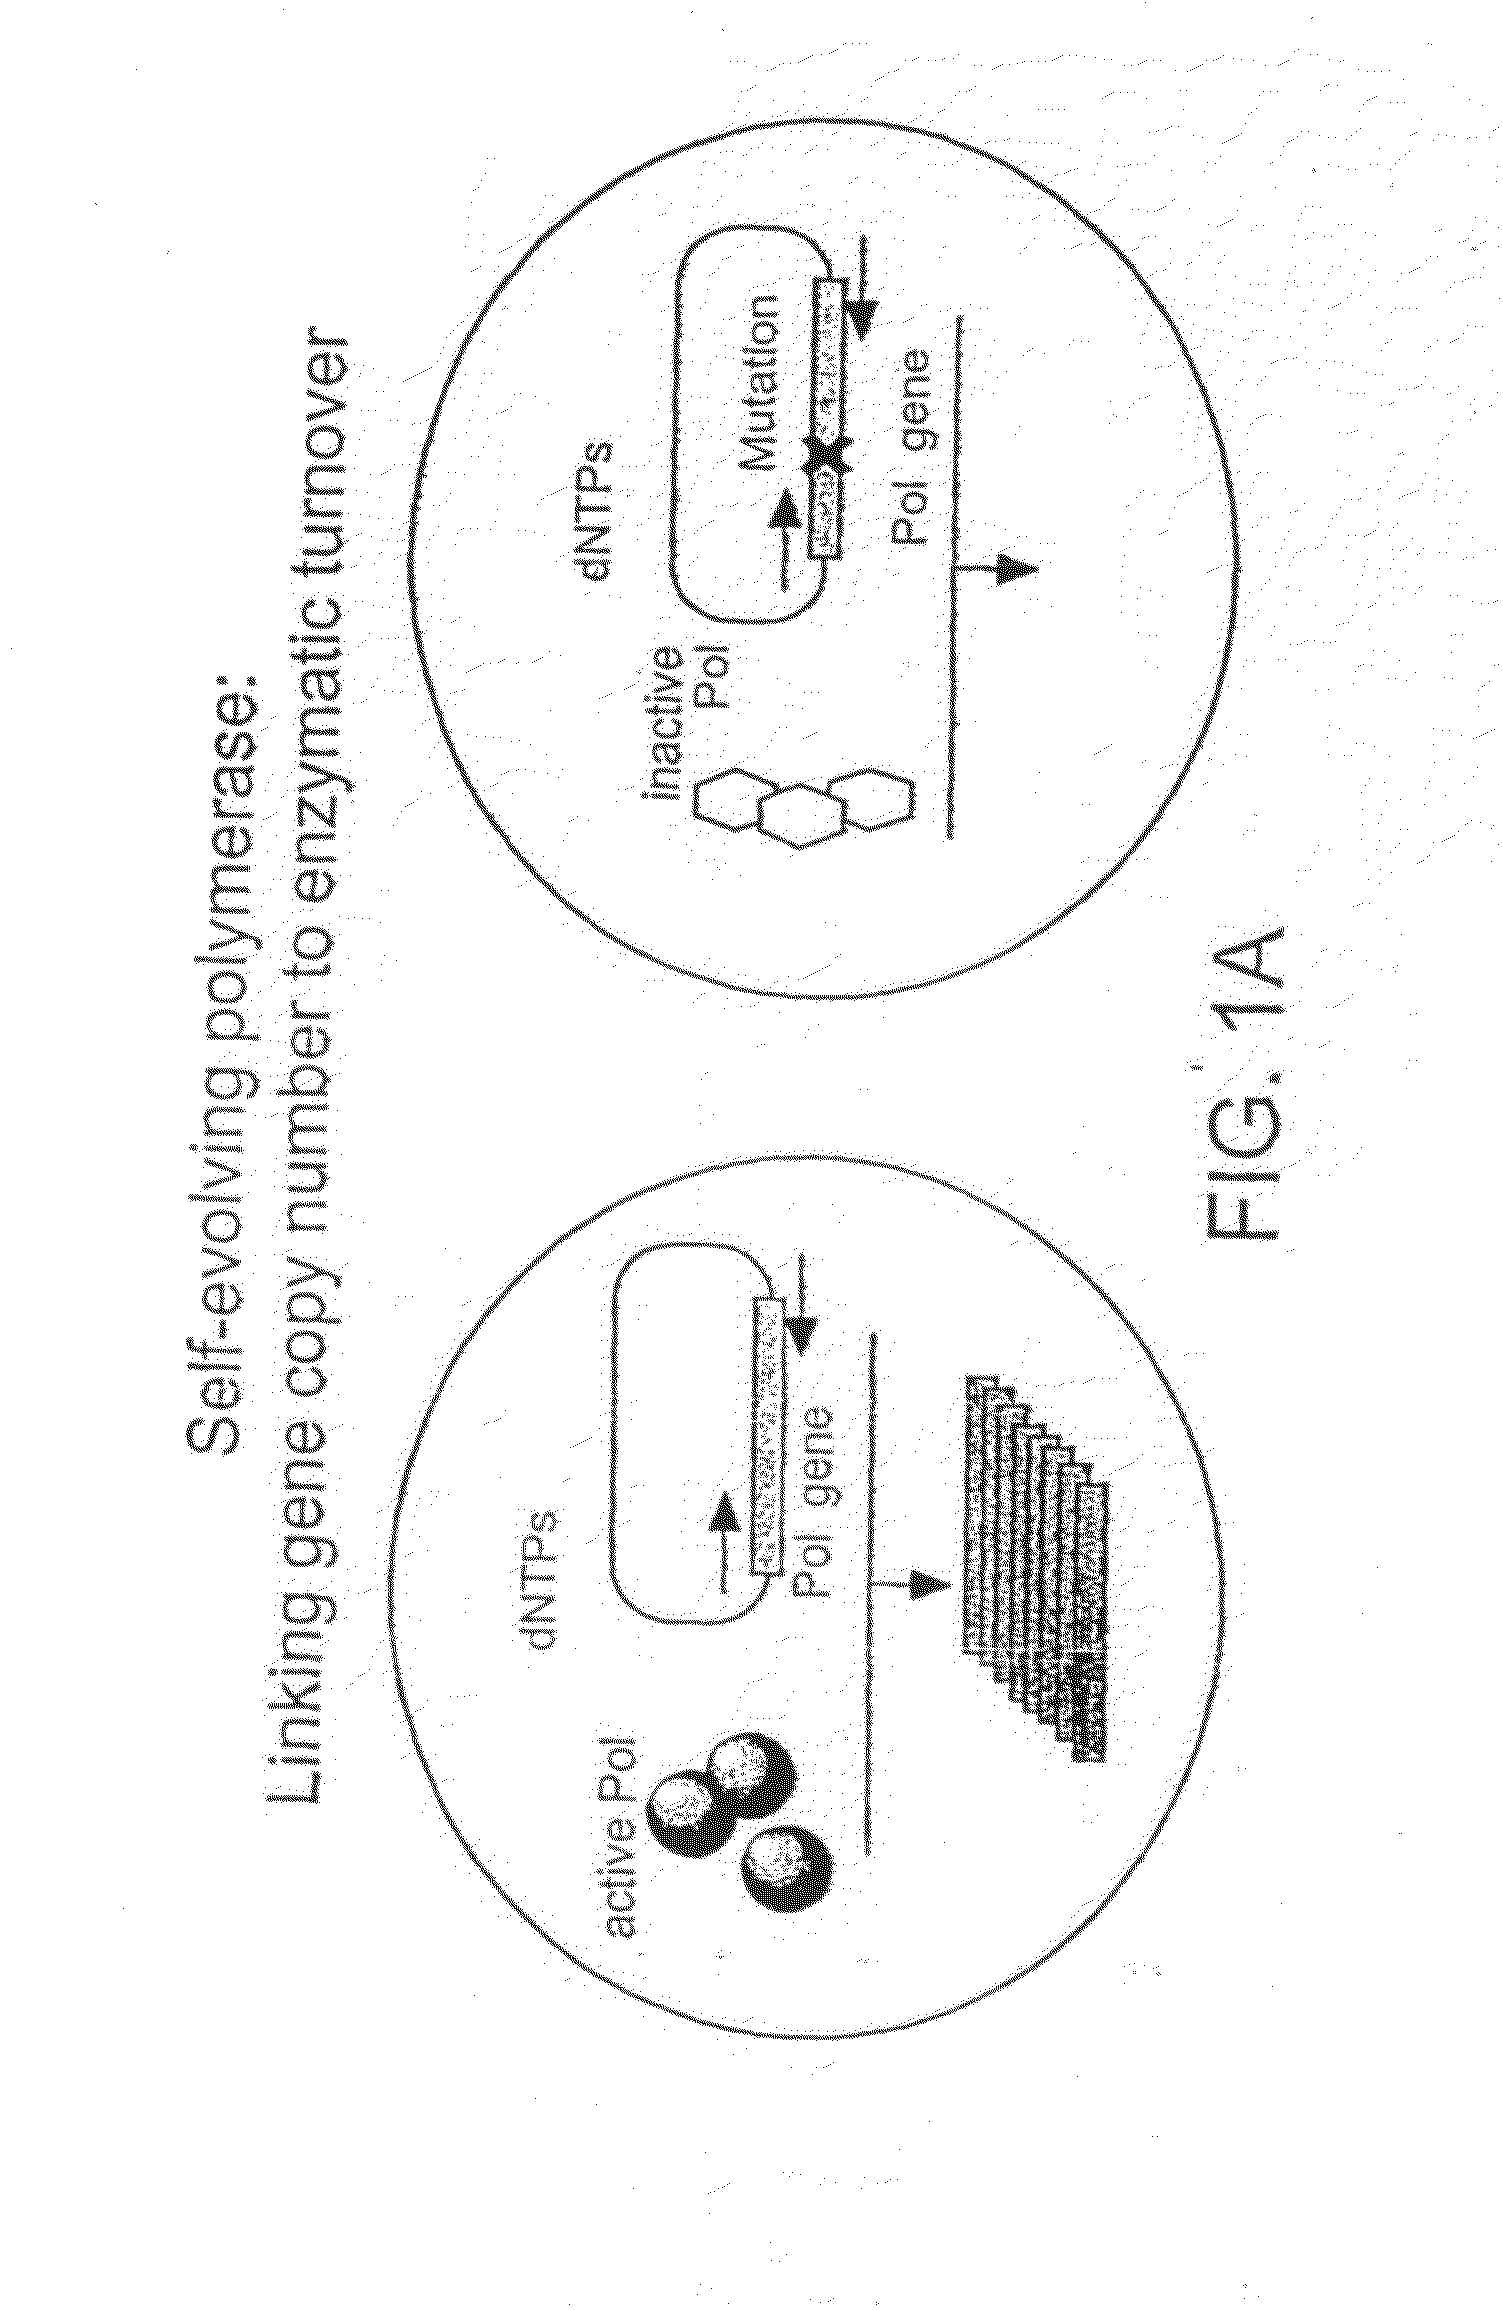 Methods of increasing the concentration of a nucleic acid